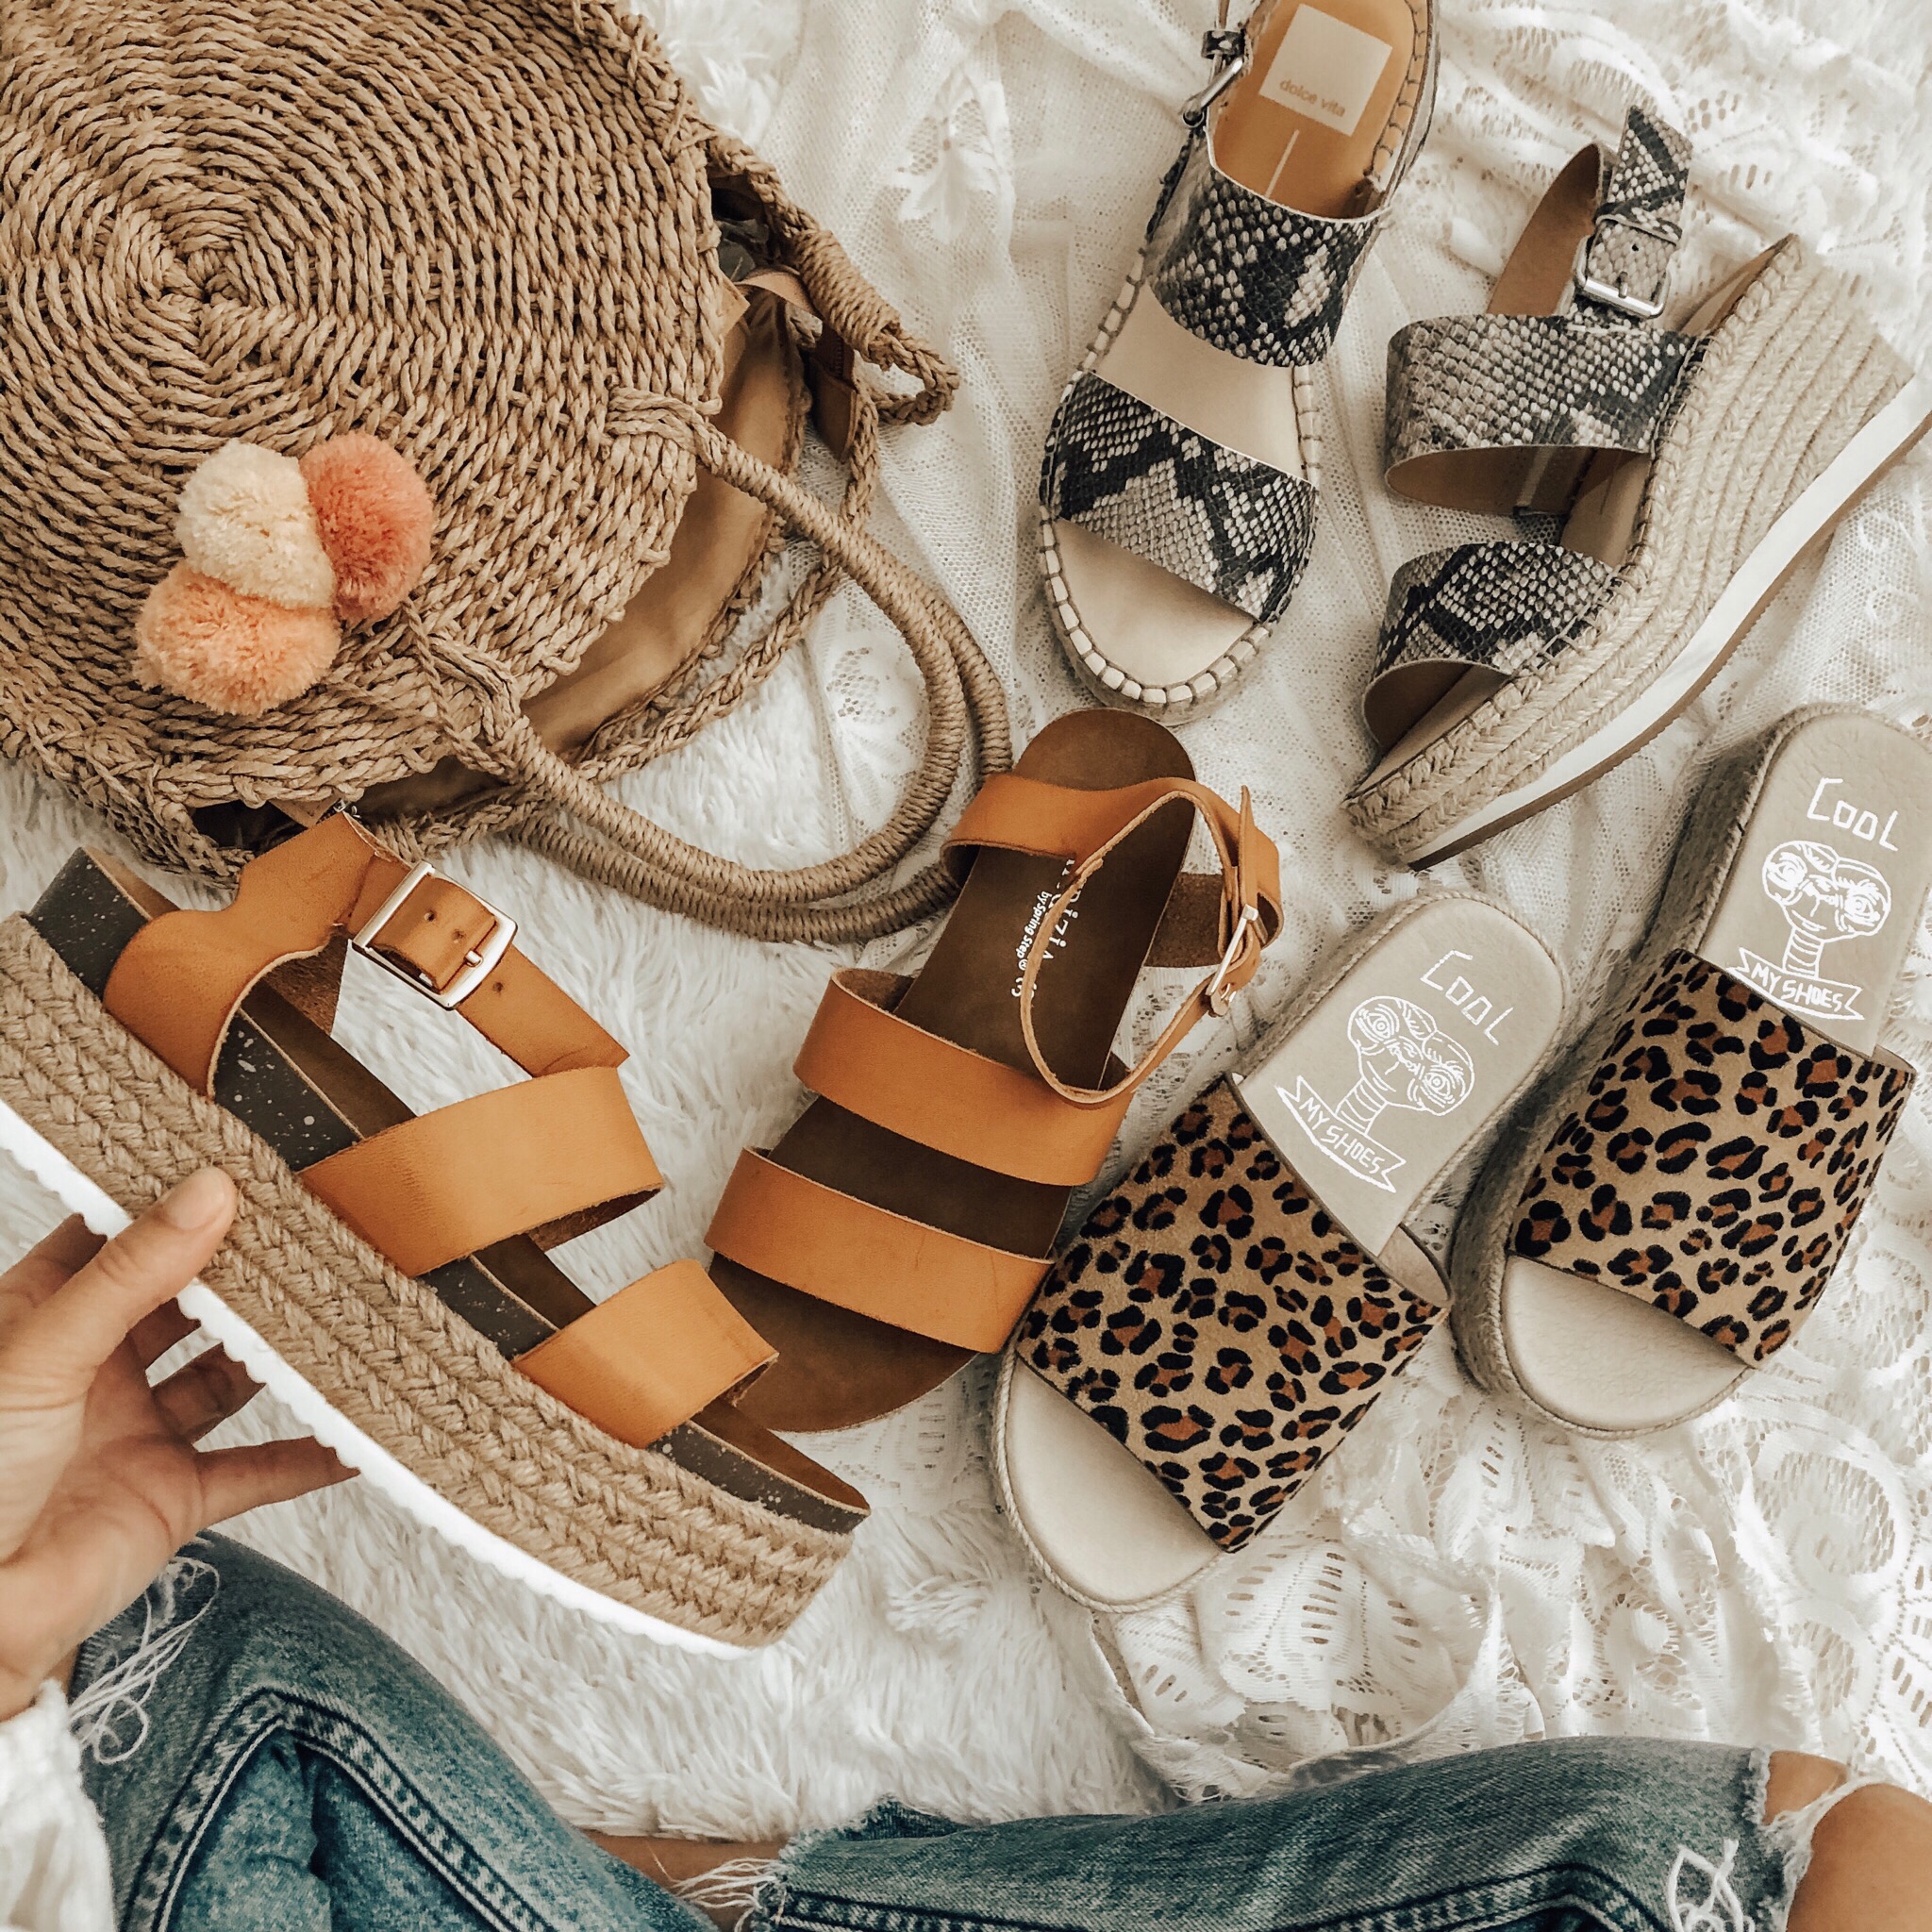 APRIL TOP 10- Jaclyn De Leon Style + Here you have my top selling items for the entire month of April. No surprise the coziest jumpsuit and the cutest espadrilles I can't stop wearing come in at the top